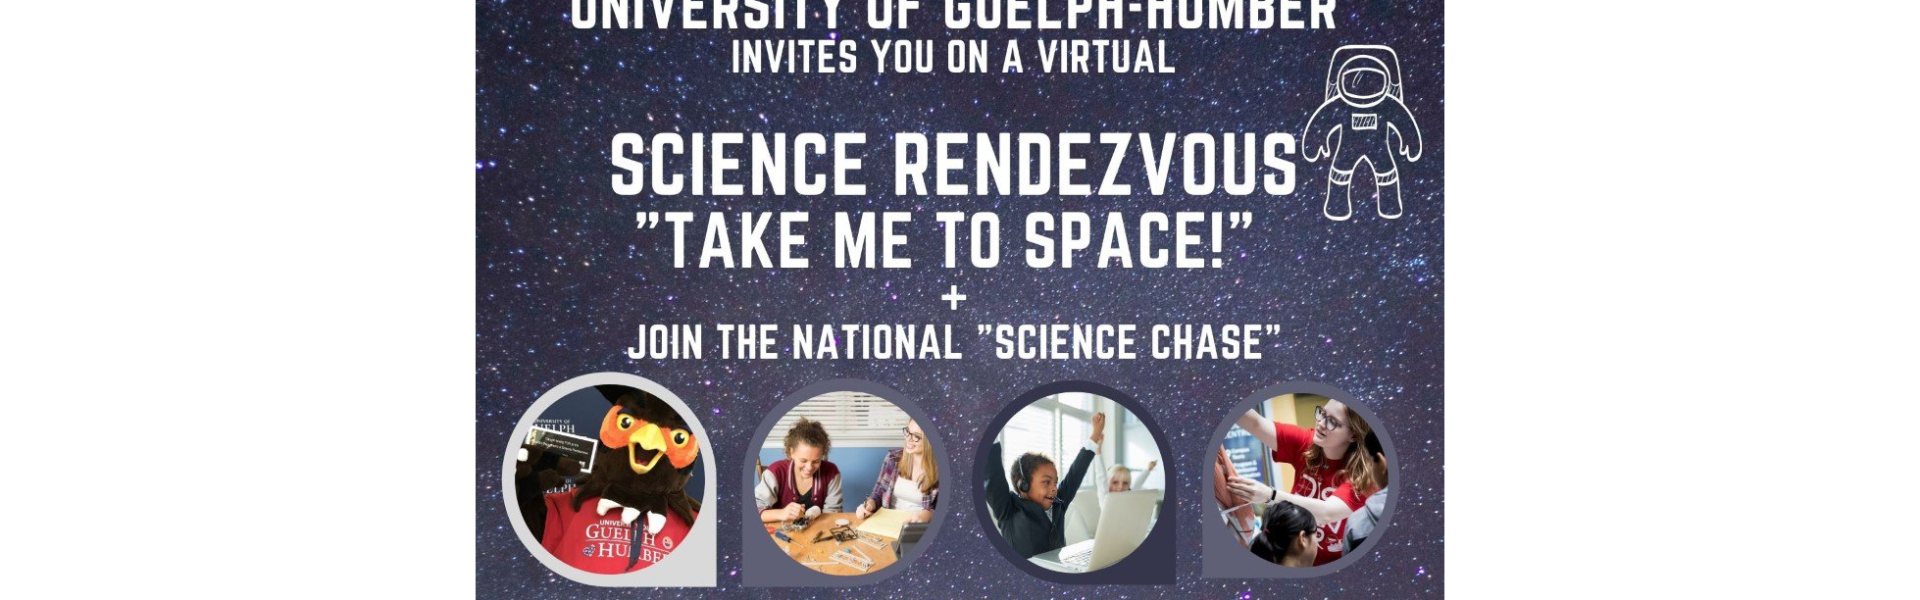 UofGH Science Rendezvous